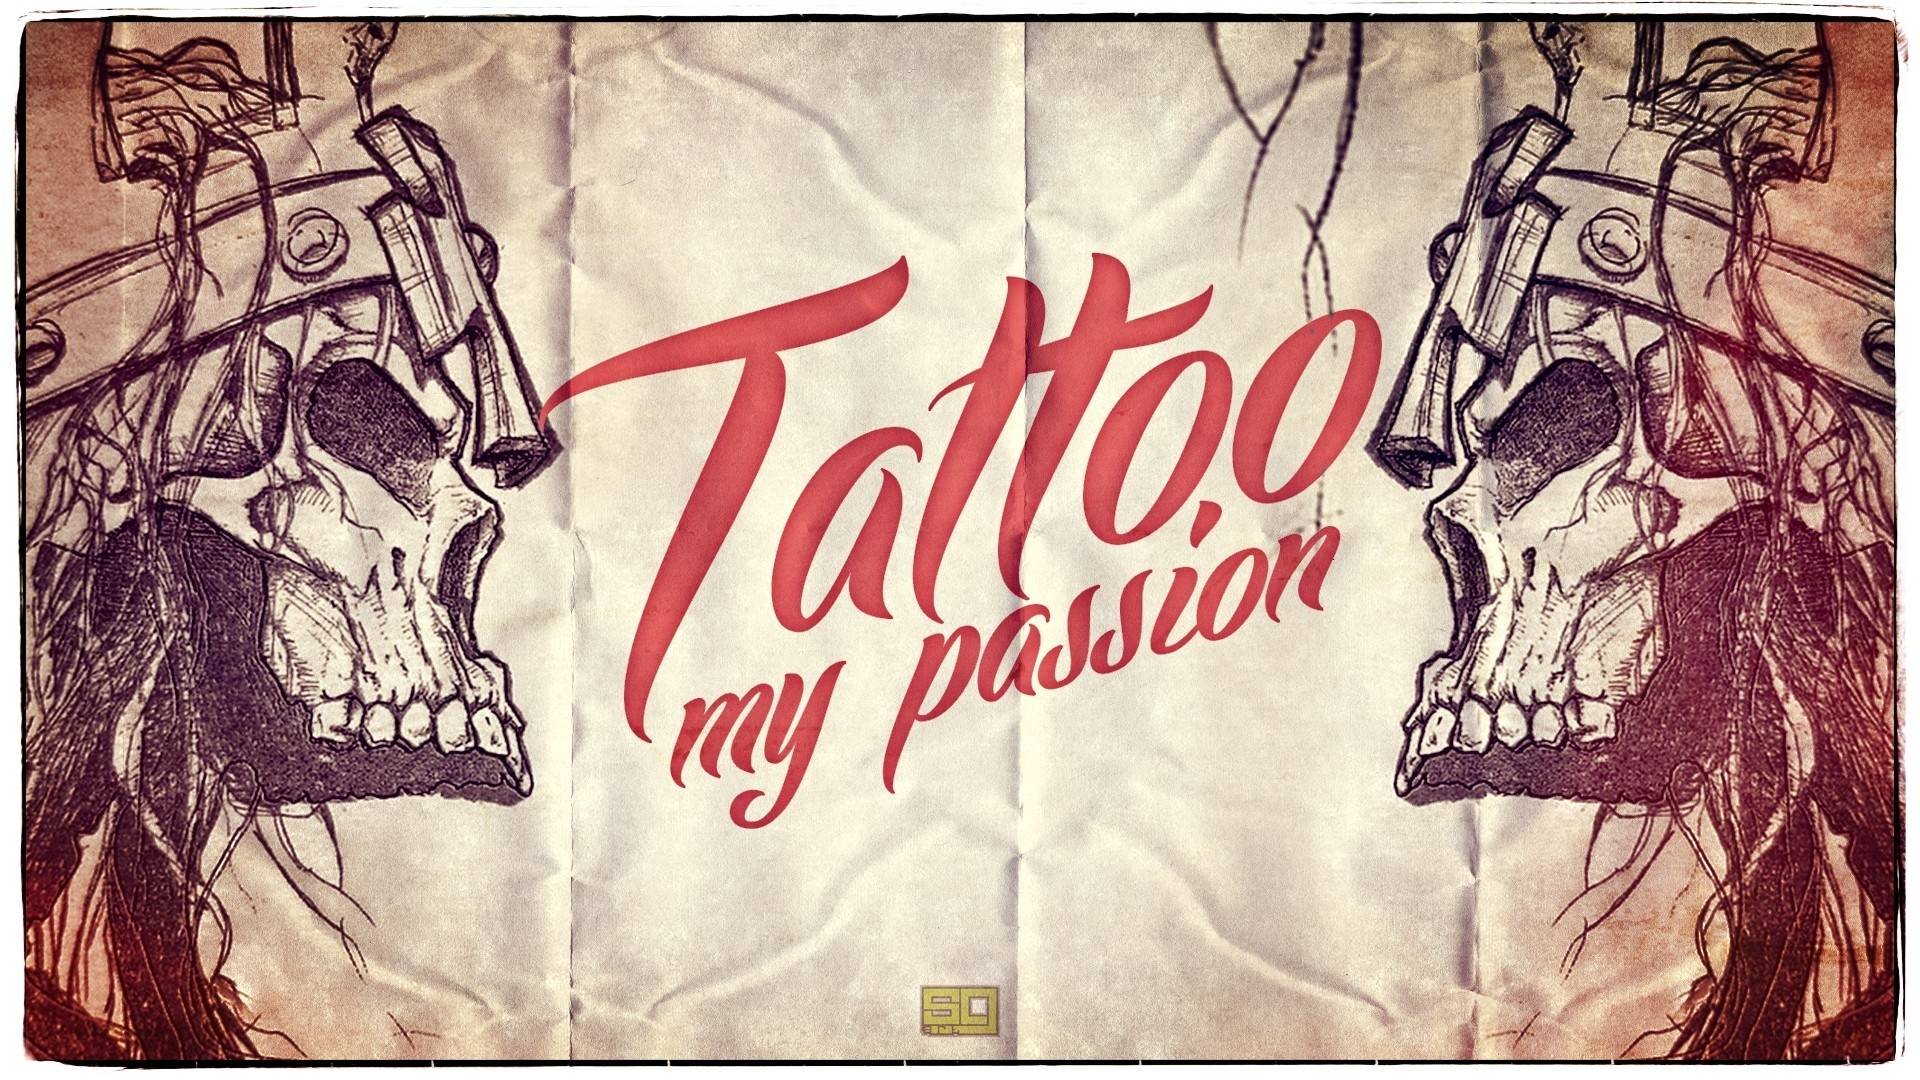 Tattoo Image Collection: Tattoo Wallpaper for PC & Mac, Laptop